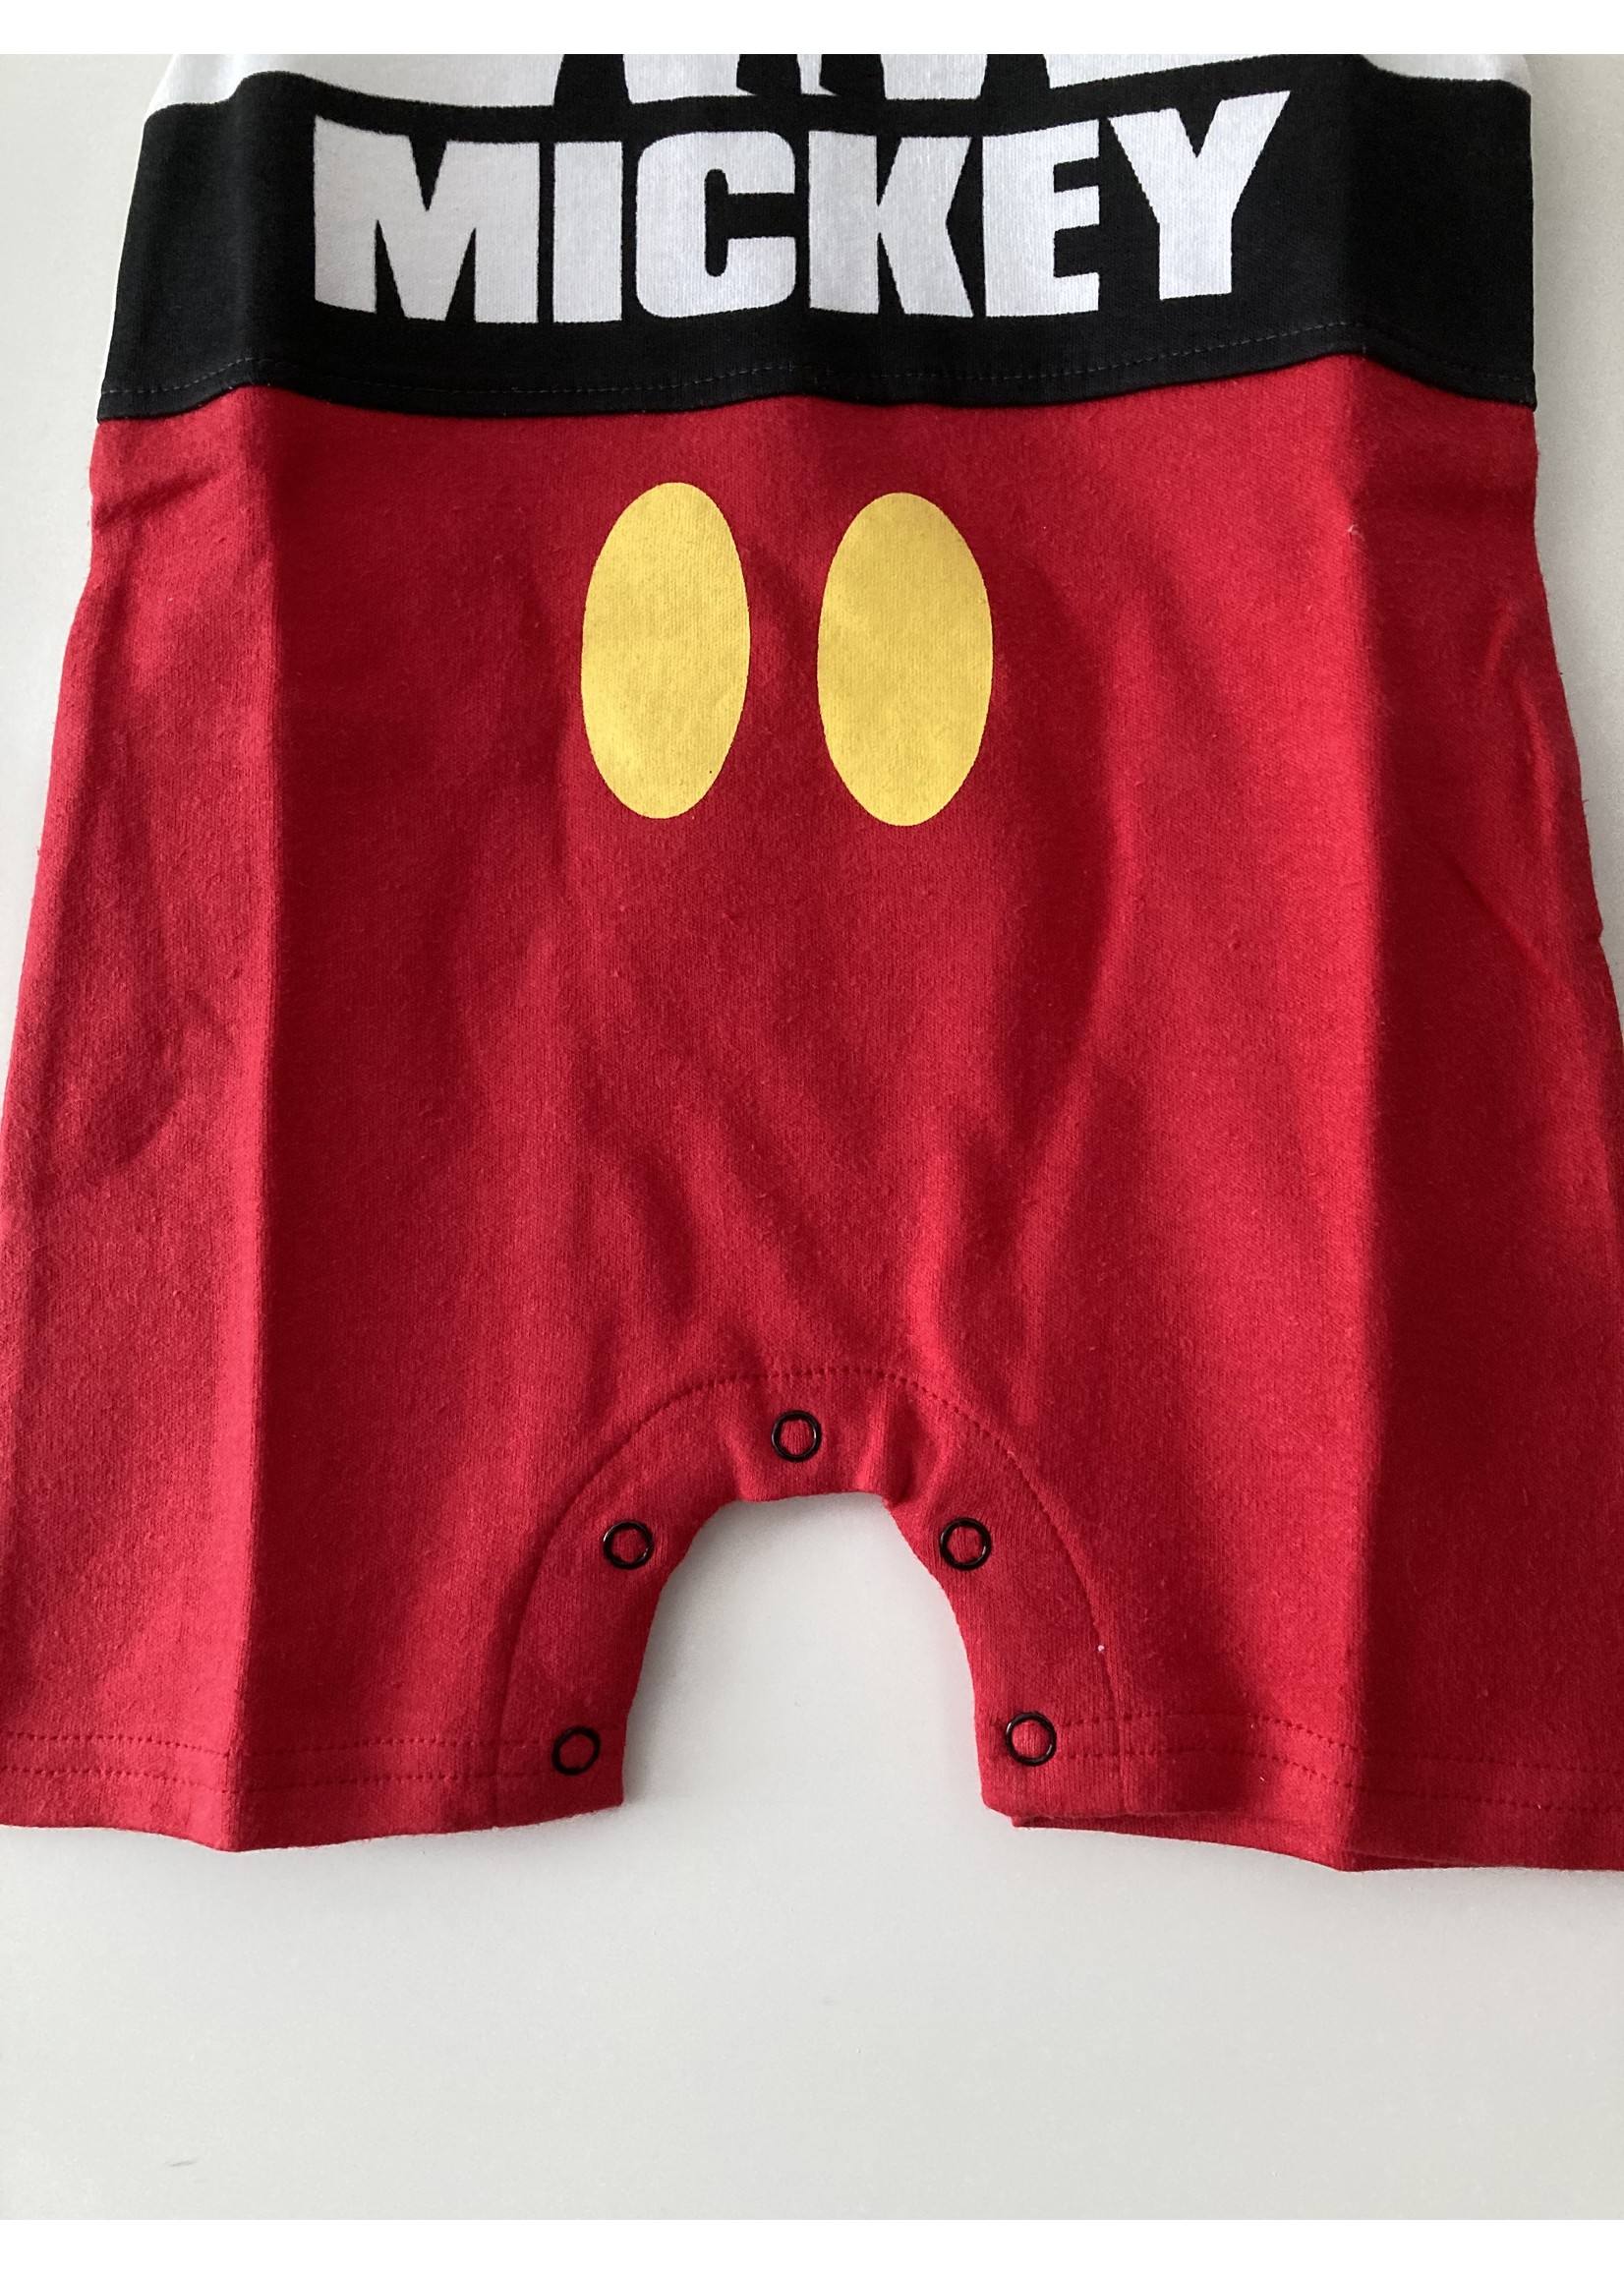 Disney baby Mickey Mouse playsuit from Disney baby white